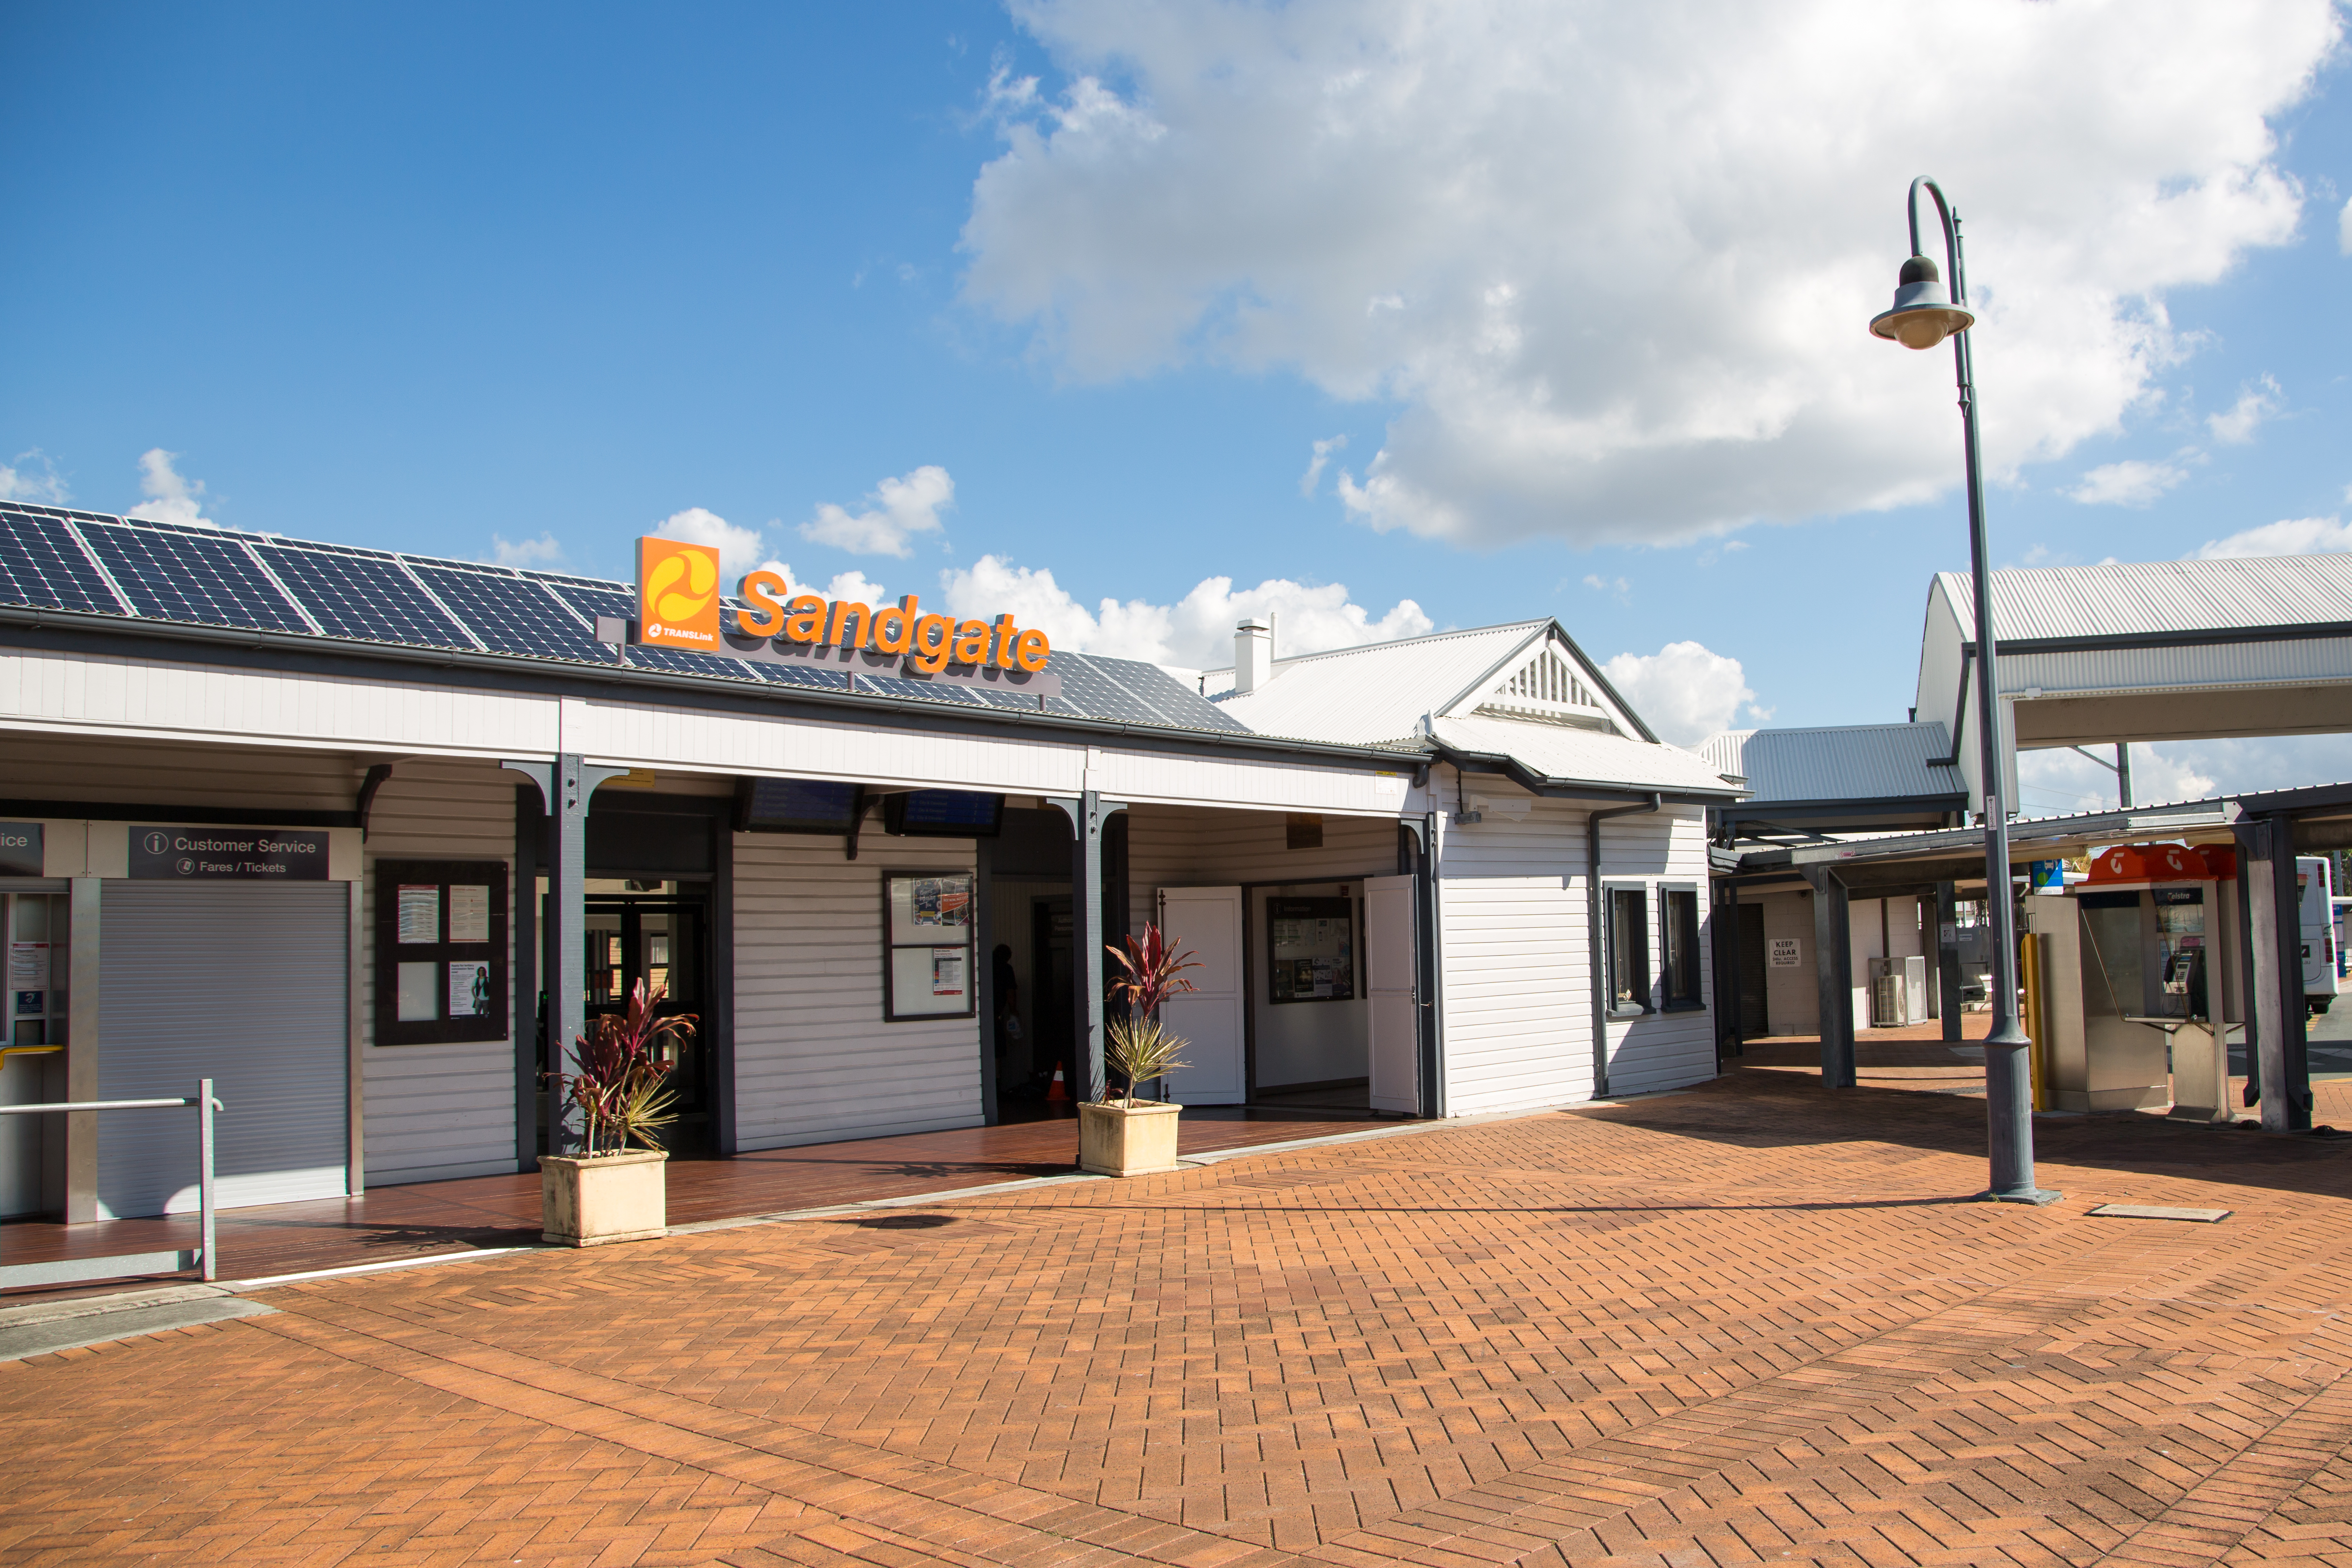 This is an image of the local heritage place known as Sandgate Rail Station